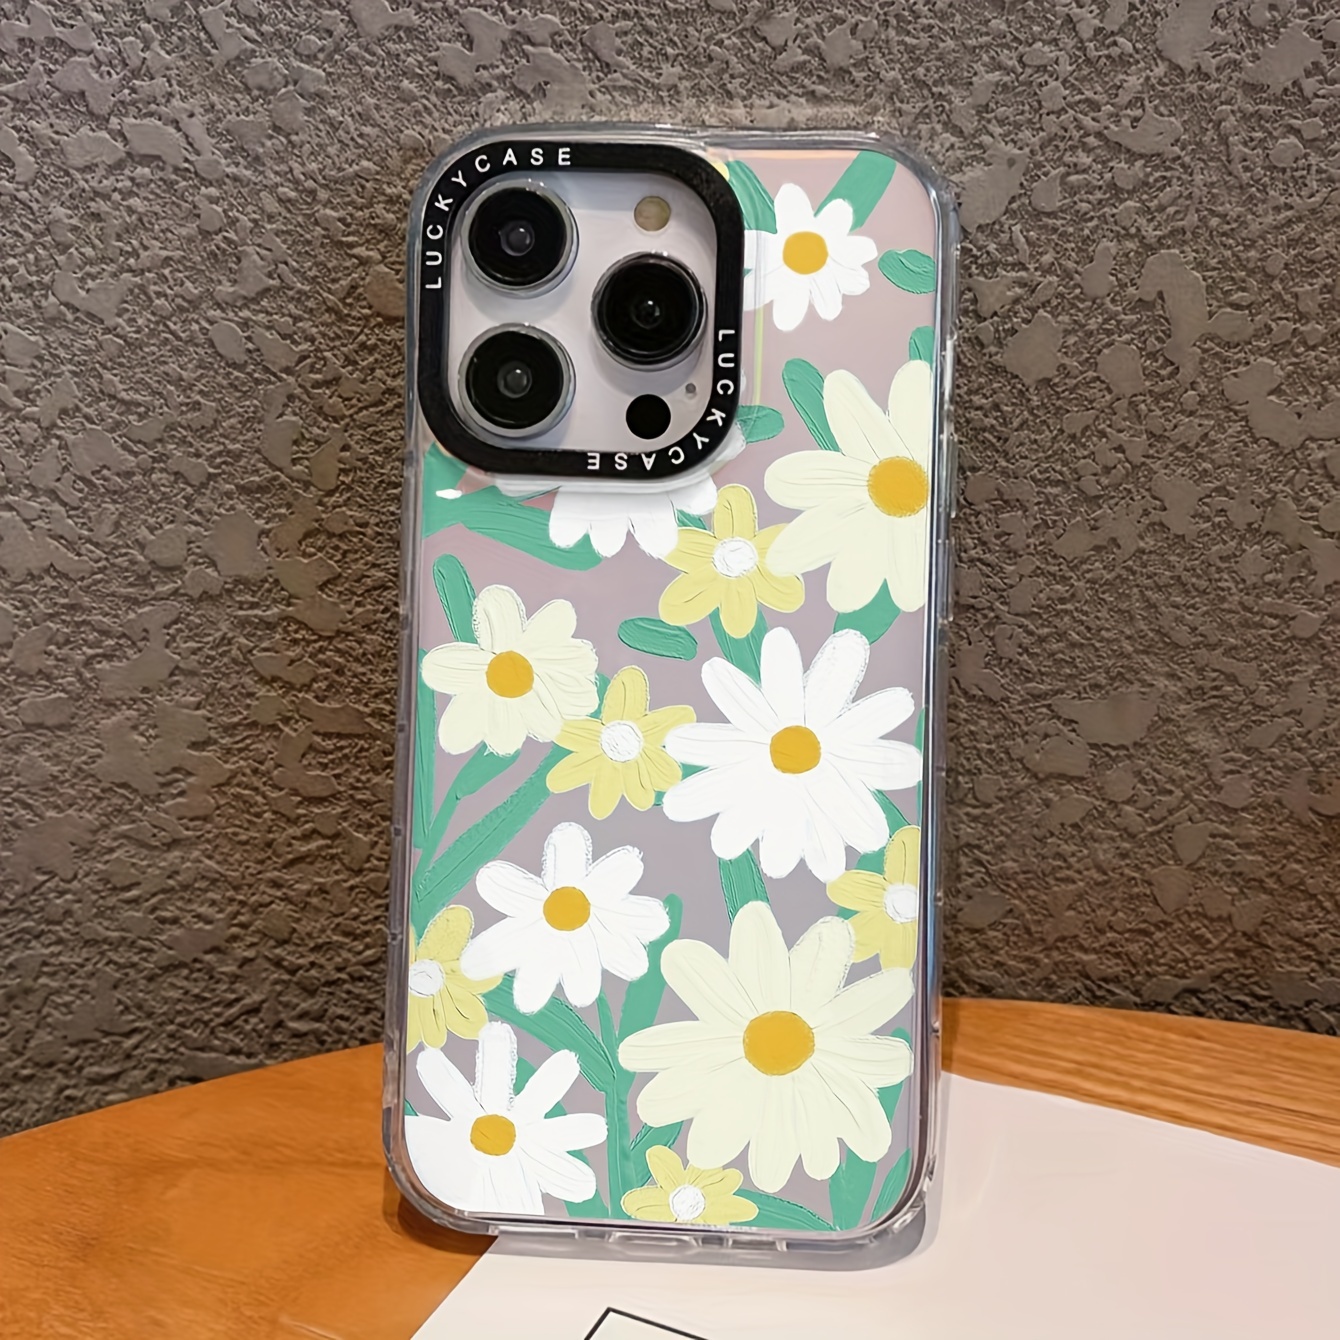 Flower Pattern Protective Shockproof Phone Case For IPhone 11/12/13/14/12 Pro Max/11 Pro/14 Pro/15